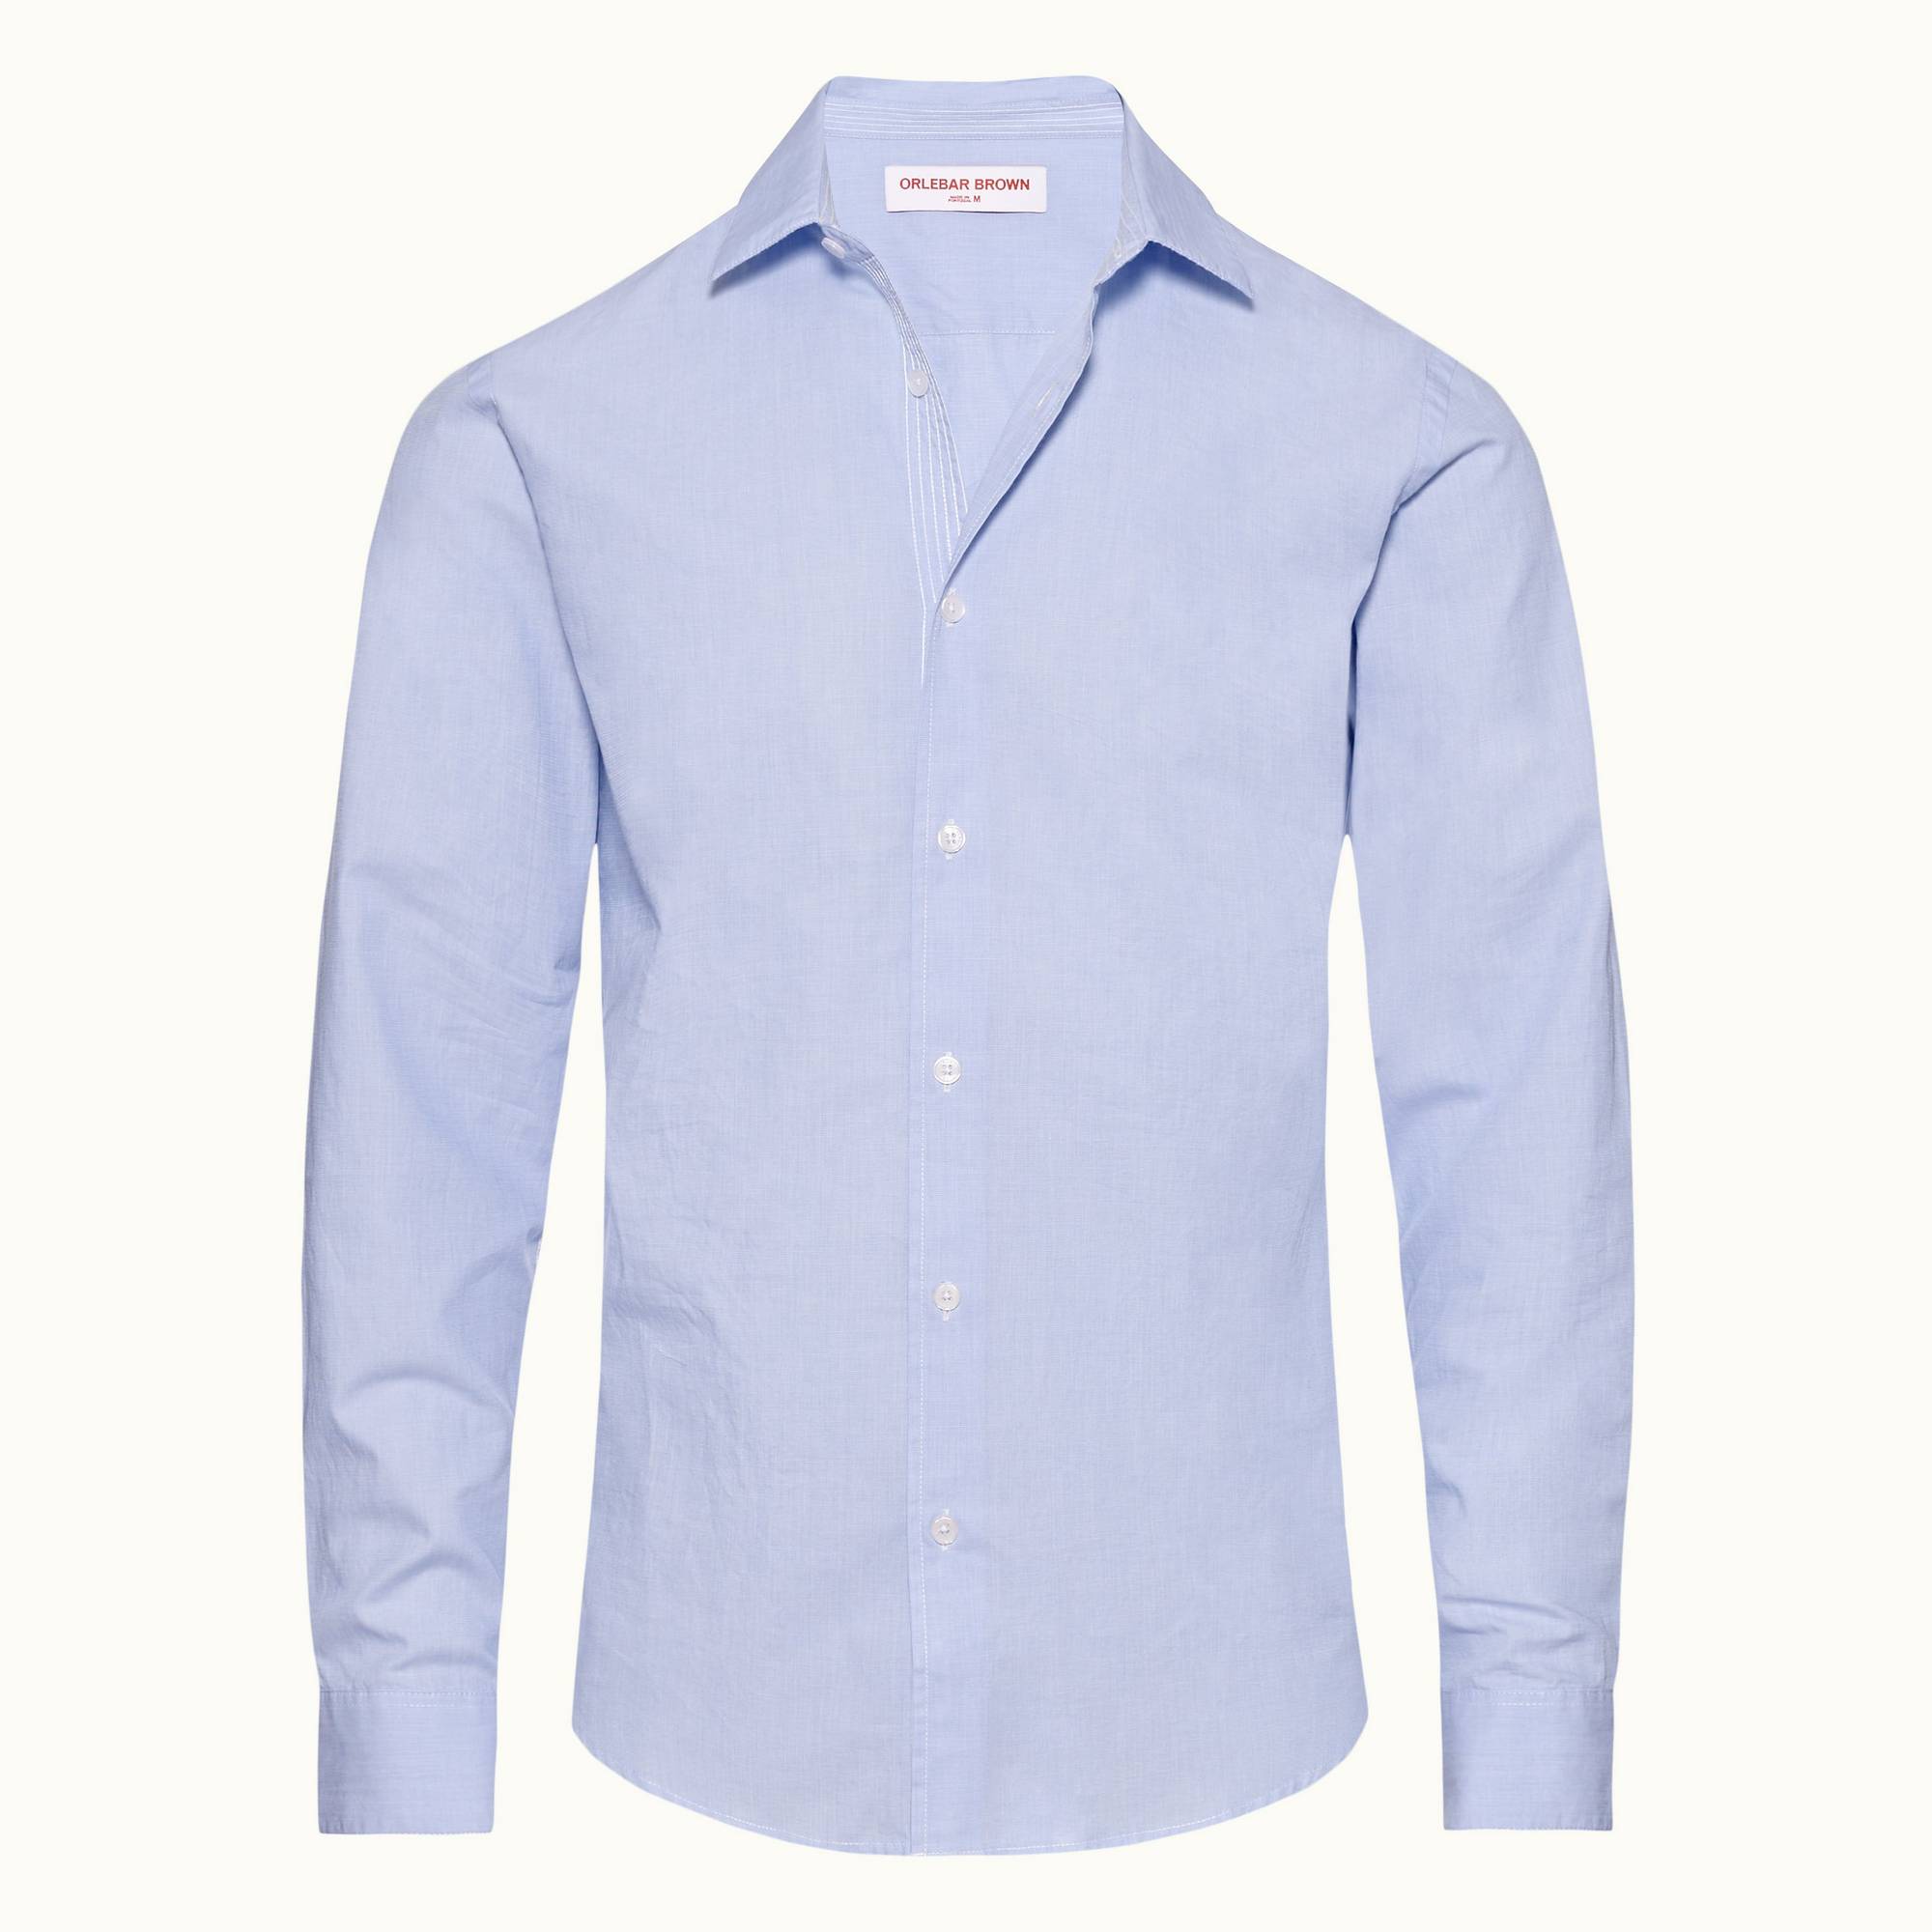 Giles Chainstitch - Mens Ice Blue/White Tailored Fit Classic Collar End-on-End Cotton Shirt